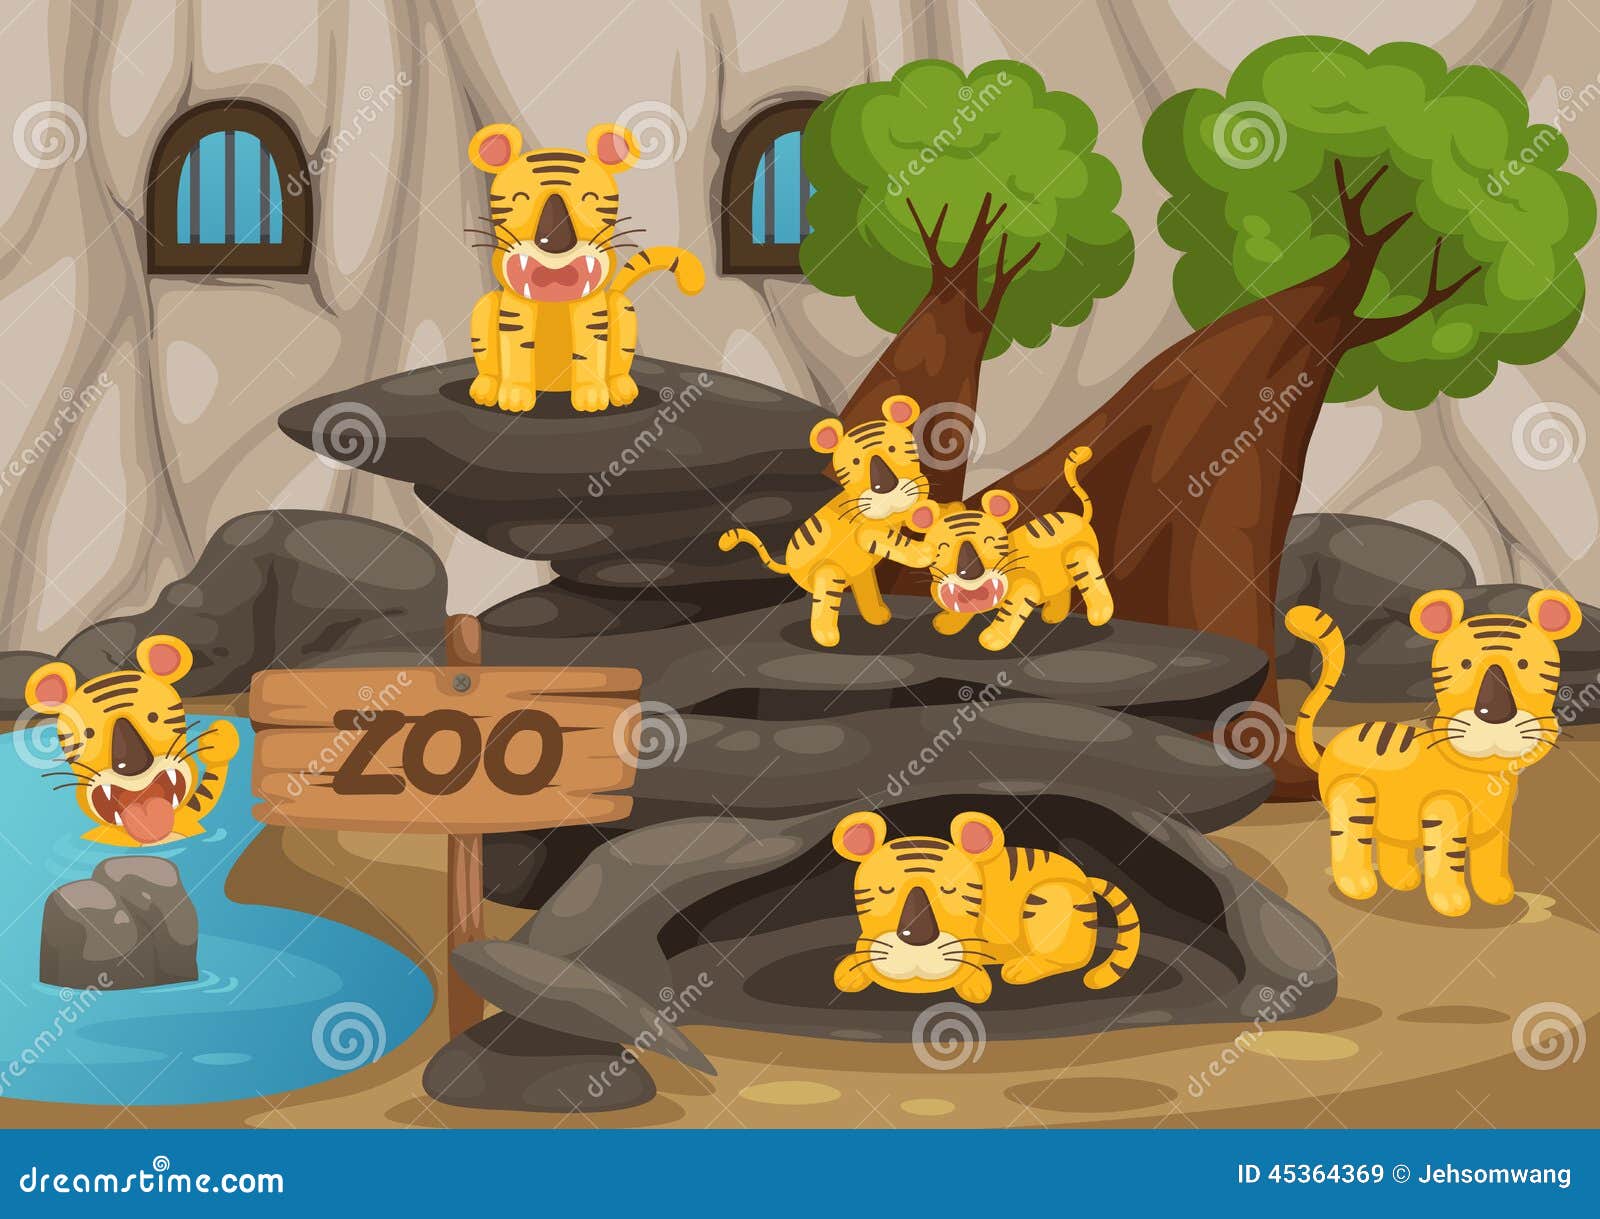 zoo and tiger